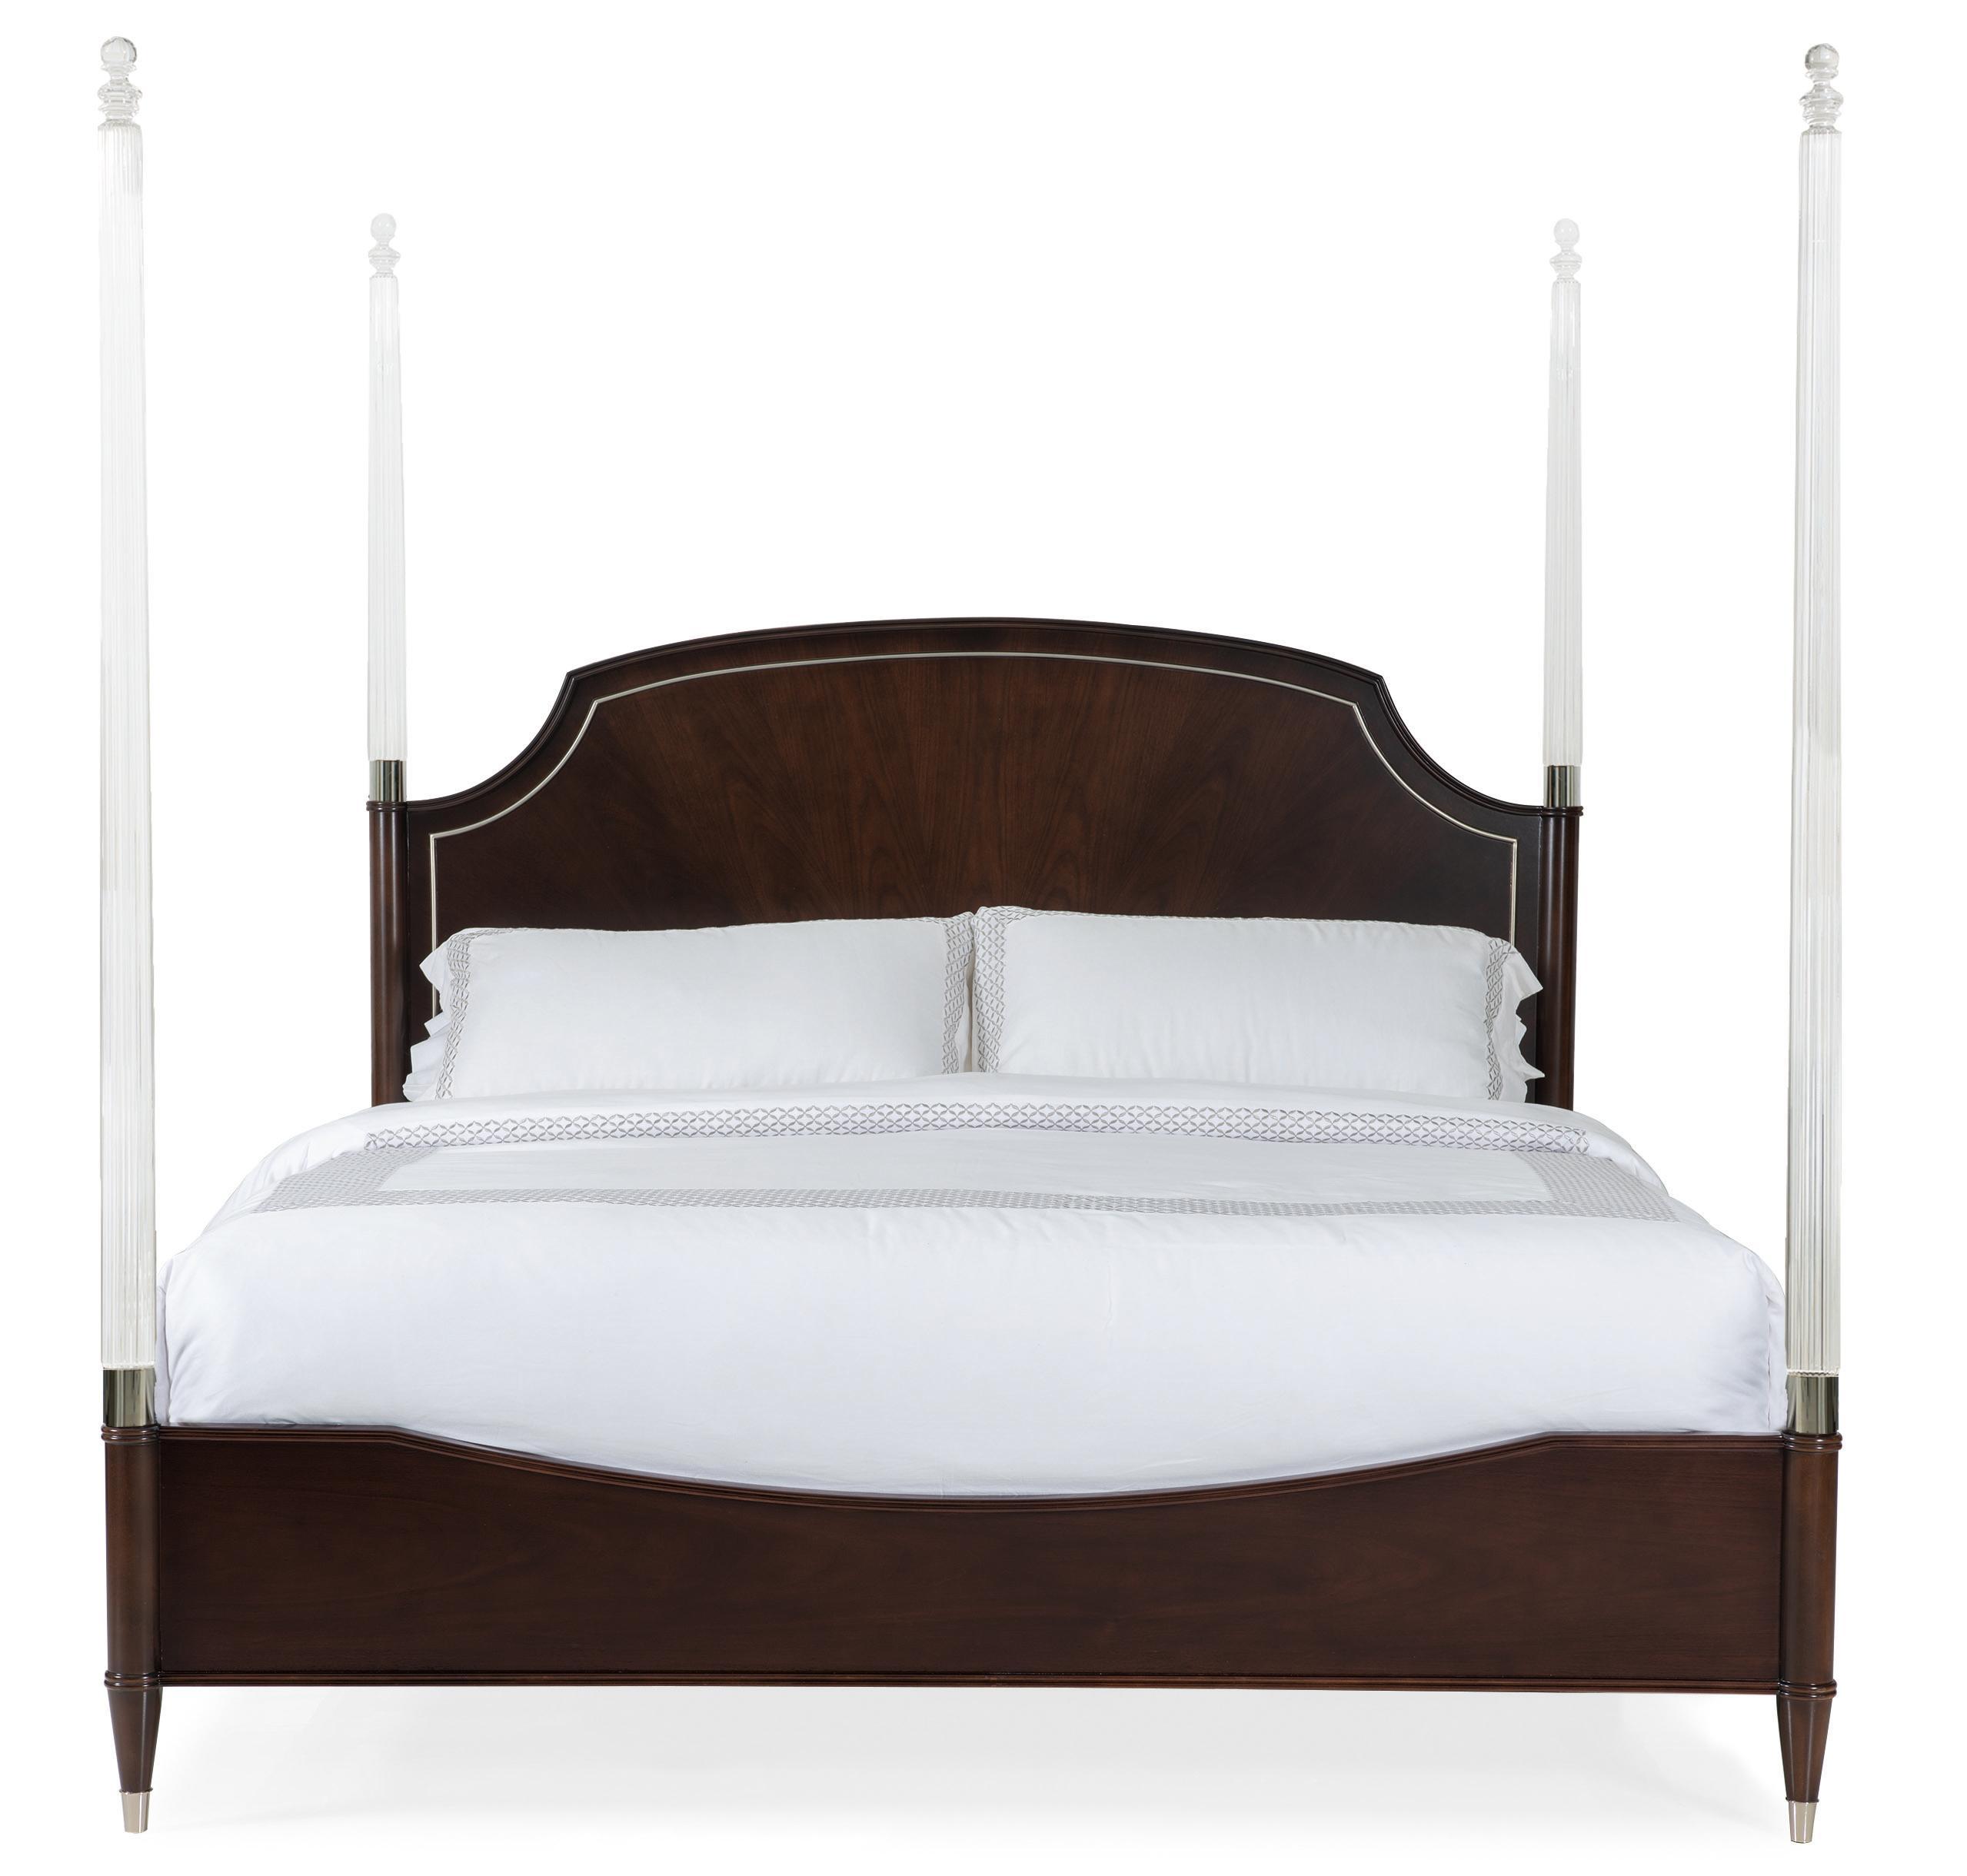 

    
Mocha Walnut & Soft Silver Paint Finish King Bed SUITE DREAMS W/POST by Caracole
